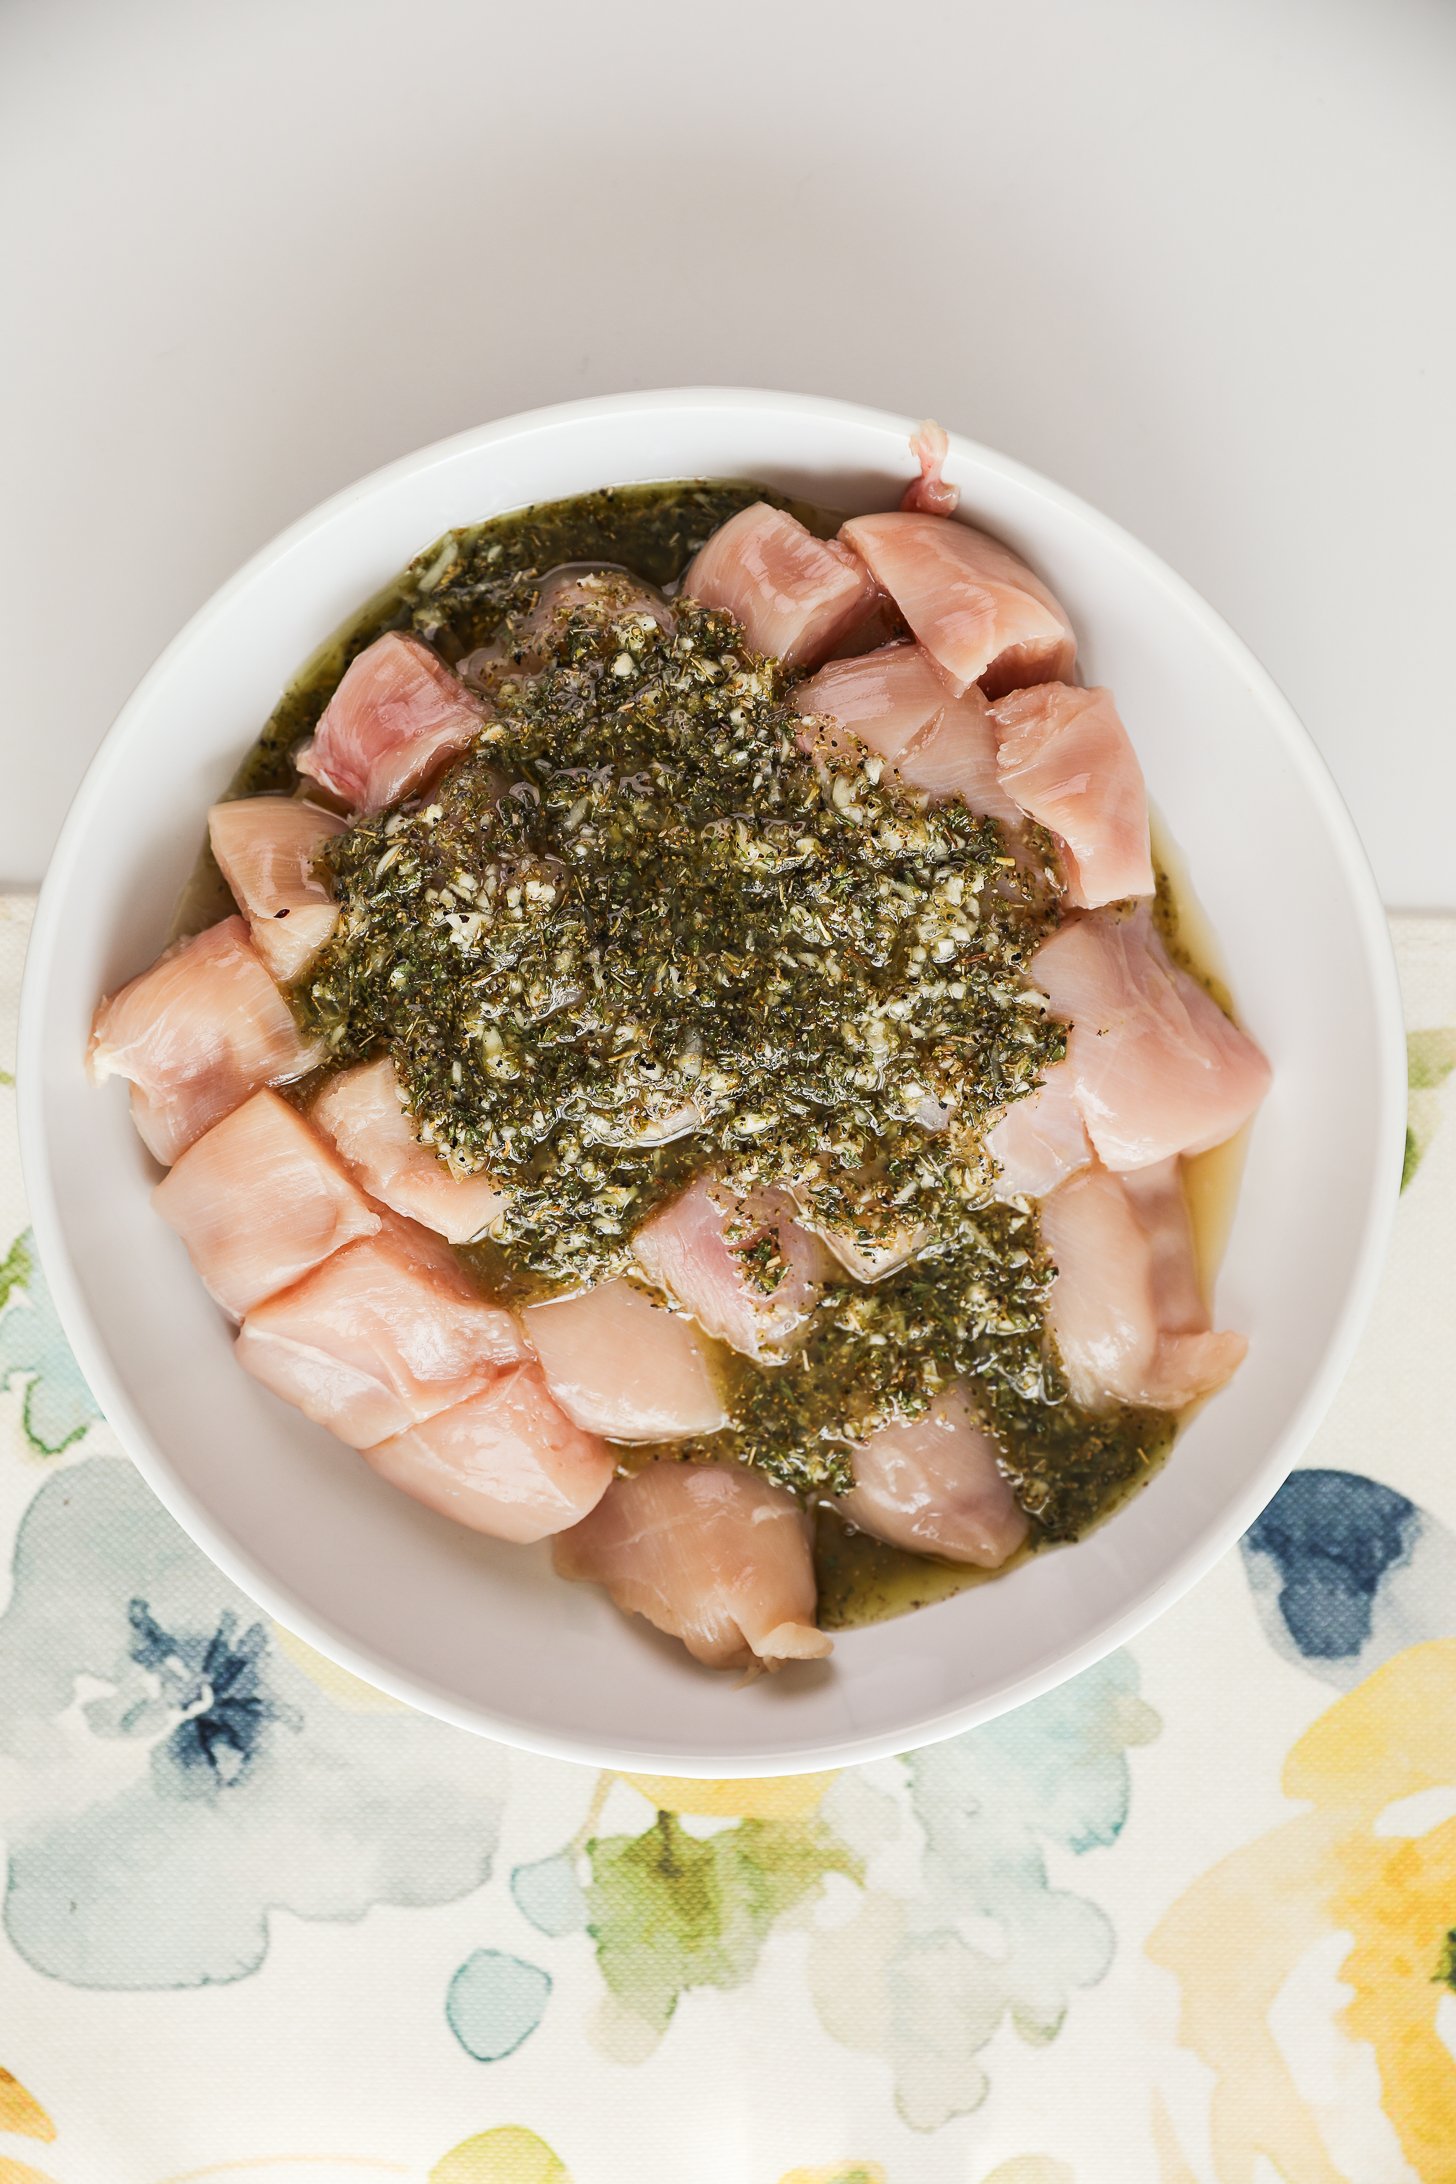 Raw chicken breast cubes topped with a oily herb marinate.